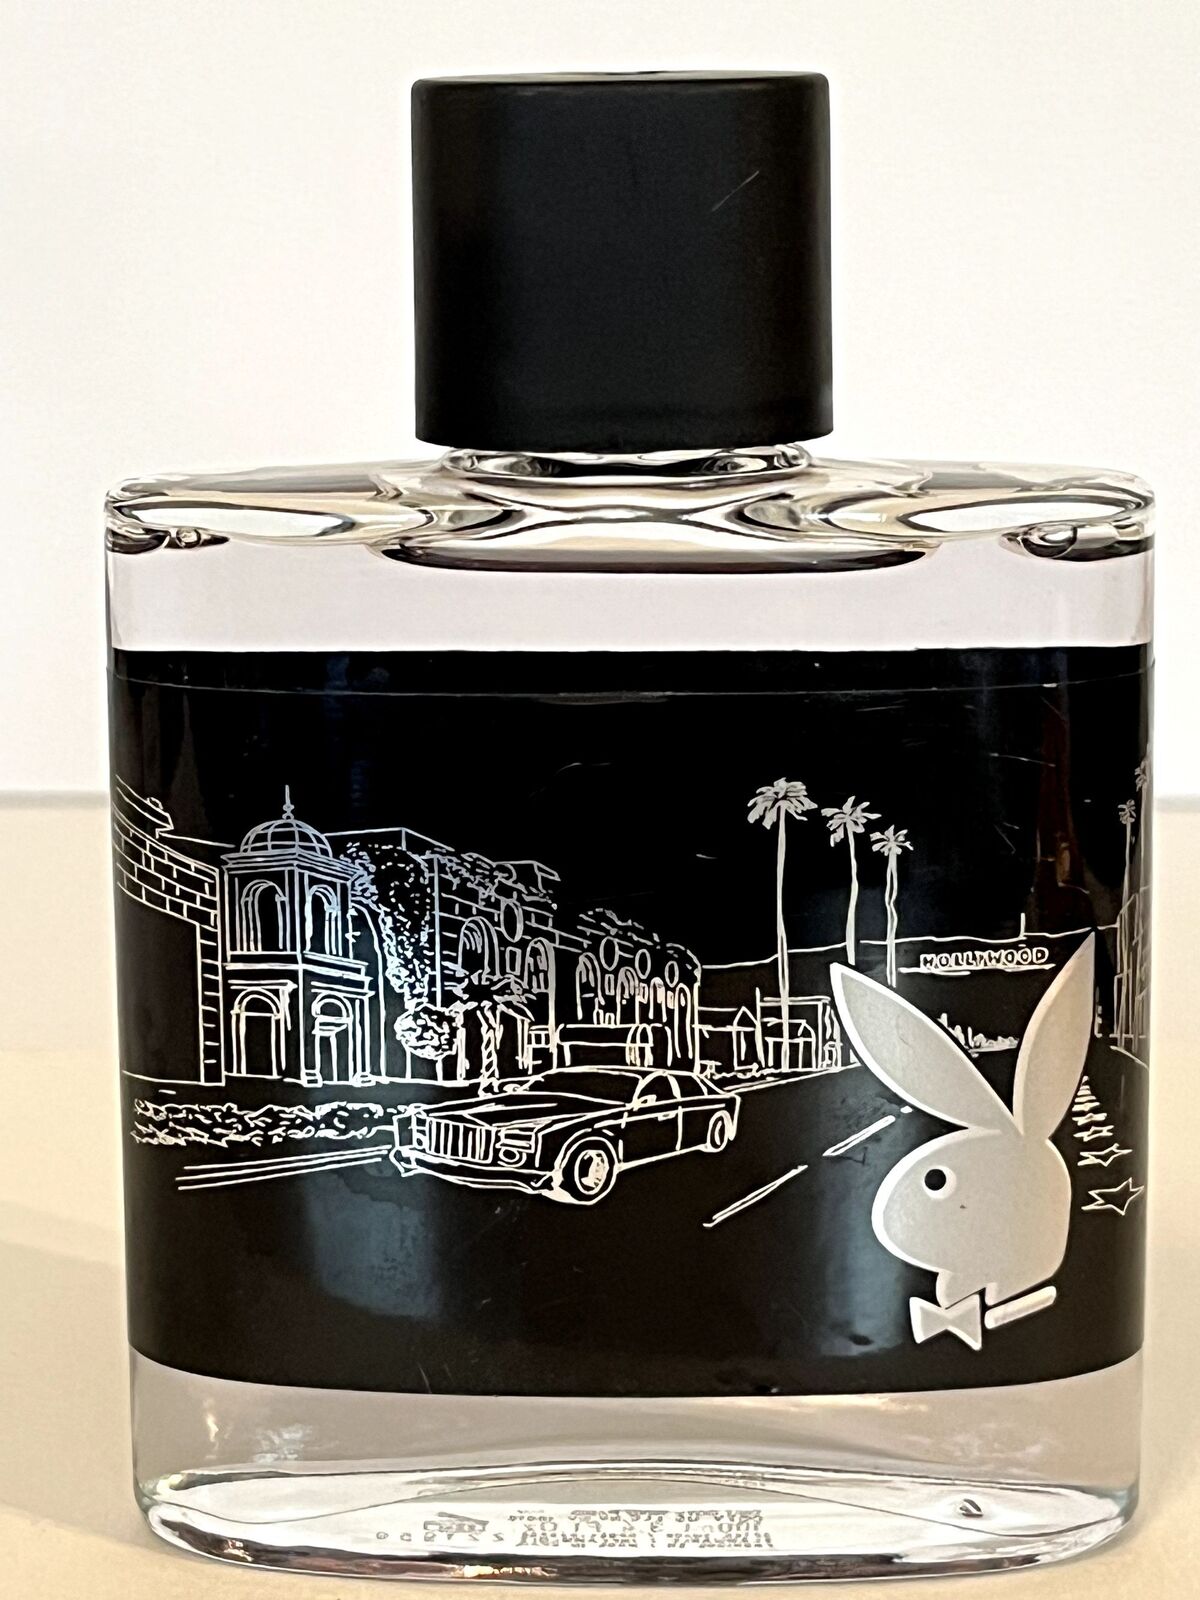 Hollywood Playboy After Shave by Coty Fragrance for Men READ DESCRIPTION